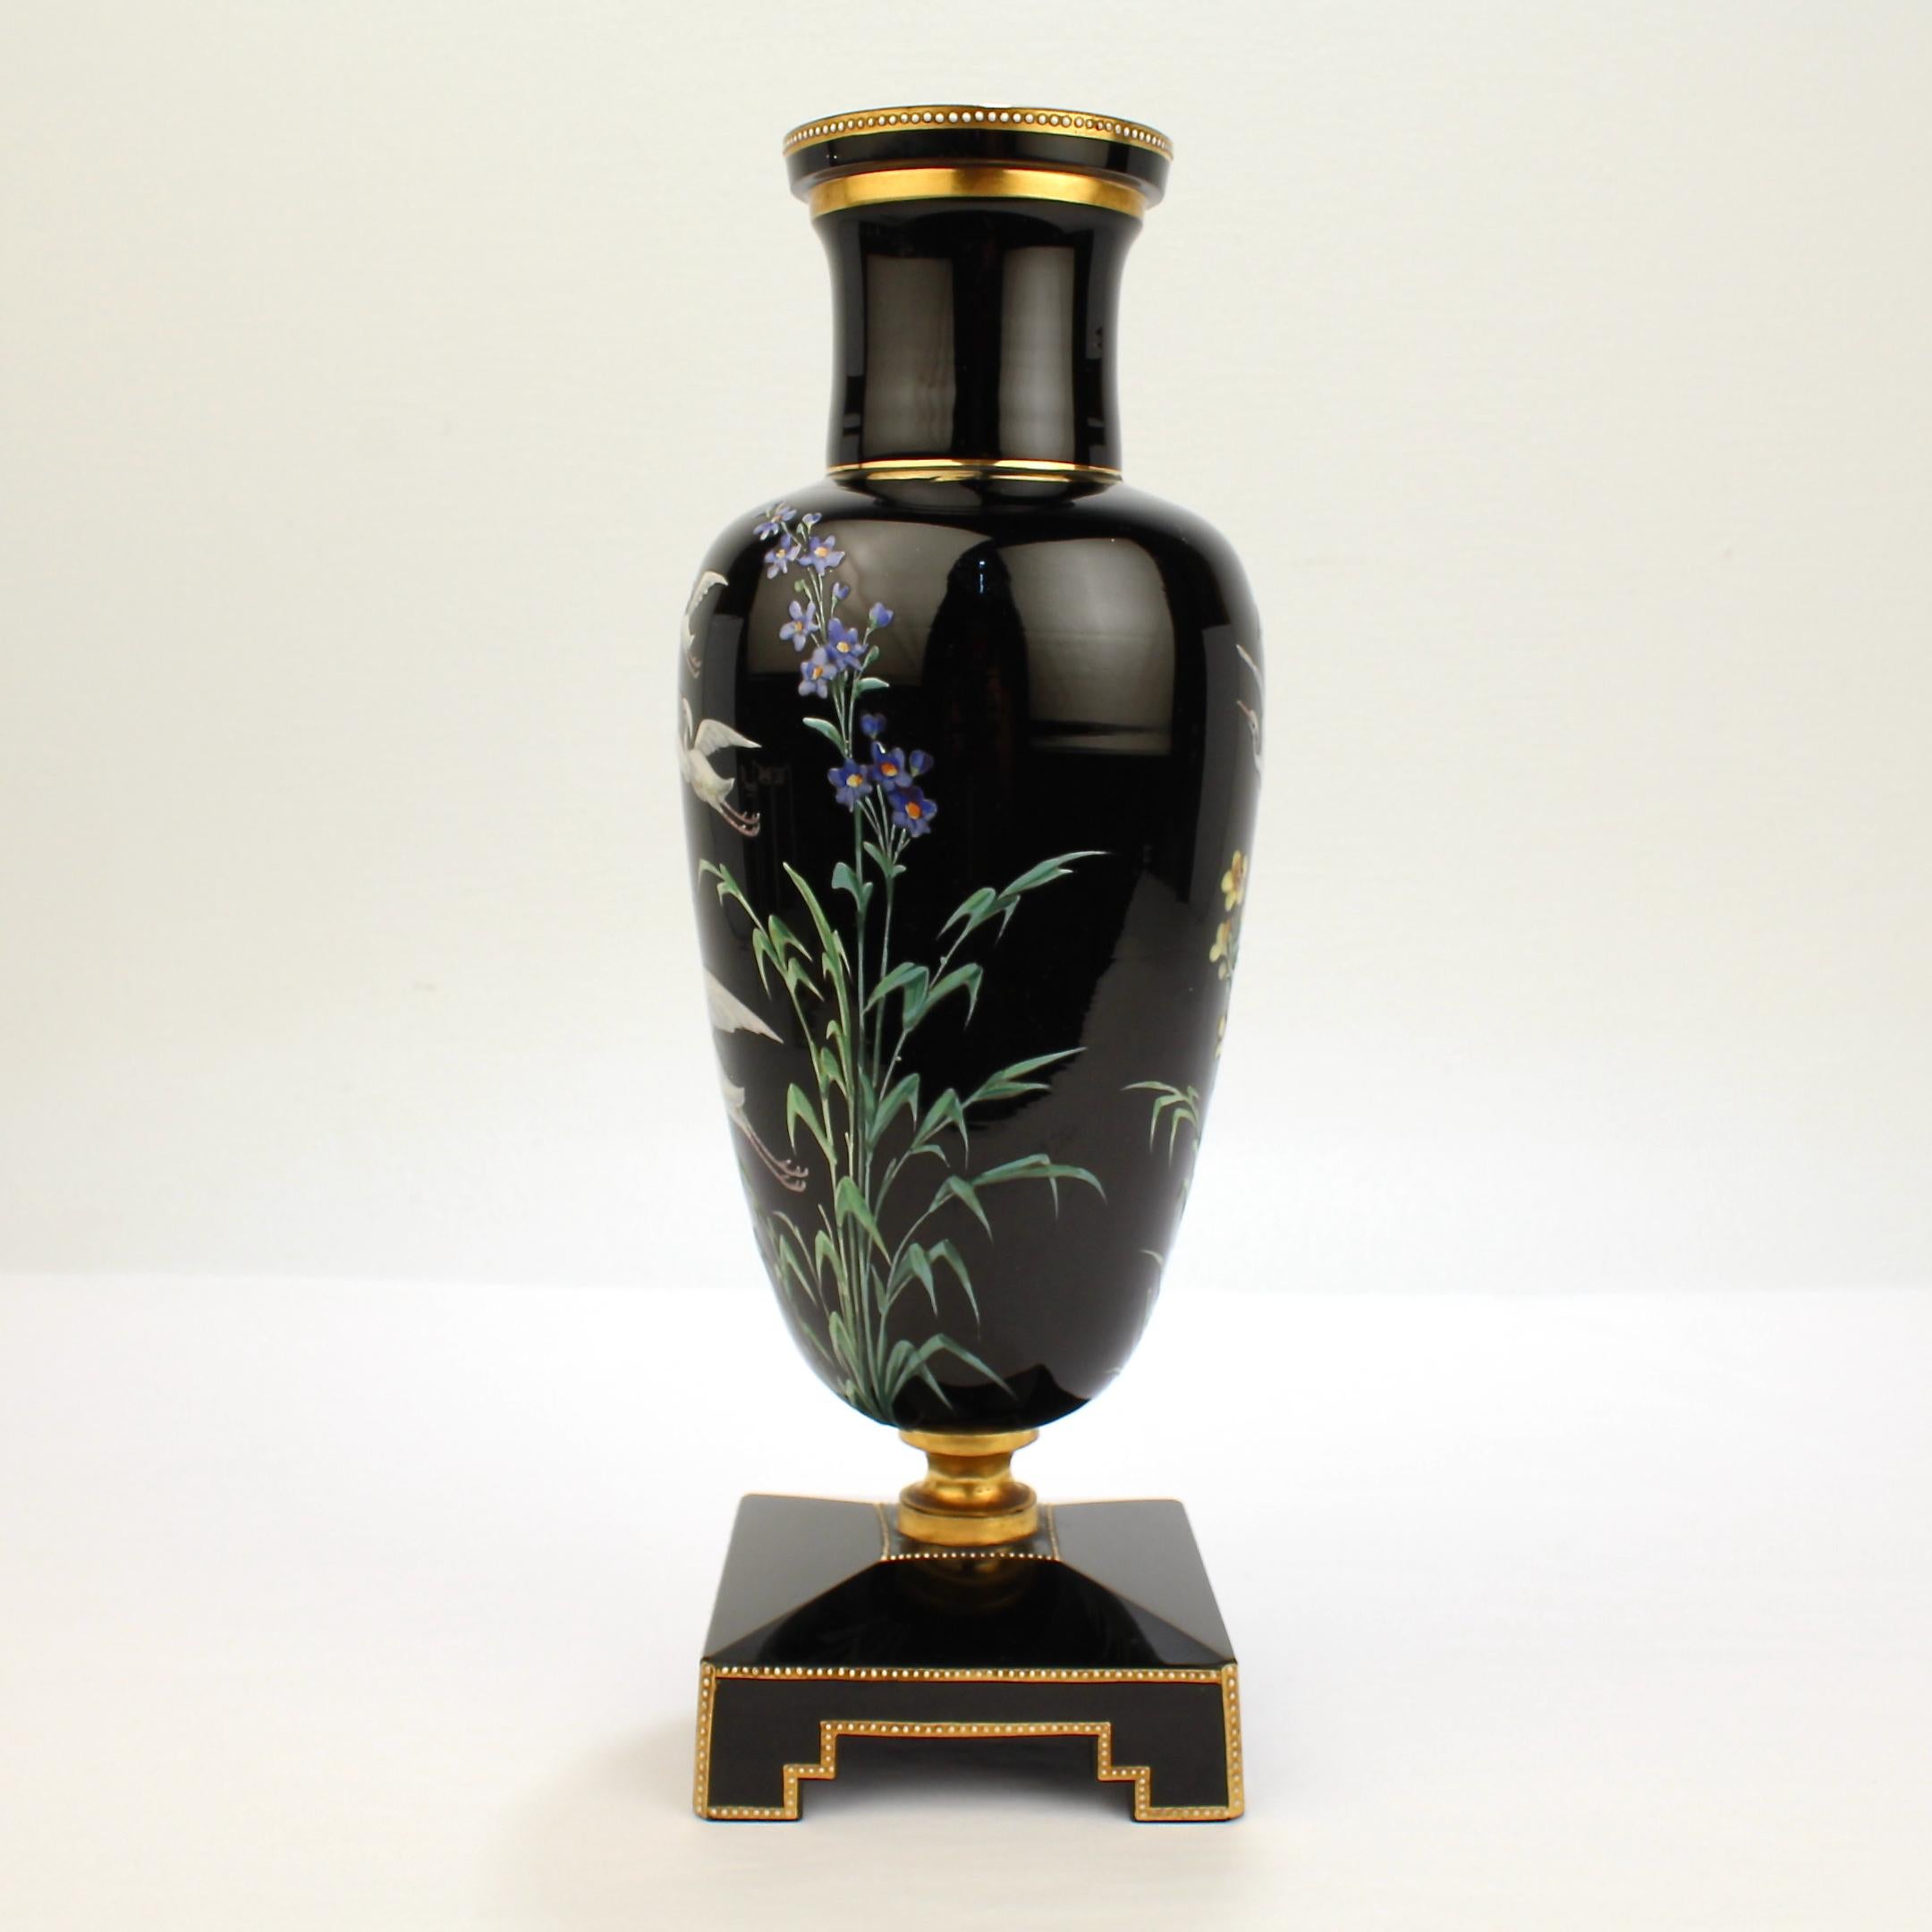 A wonderful Victorian black amethyst art glass vase.

A terrific Bohemian Moser style vase with a stepped base and vasiform body. 

The body is decorated with hand painted enameled herons or storks in flight and a variety of flowers, and the